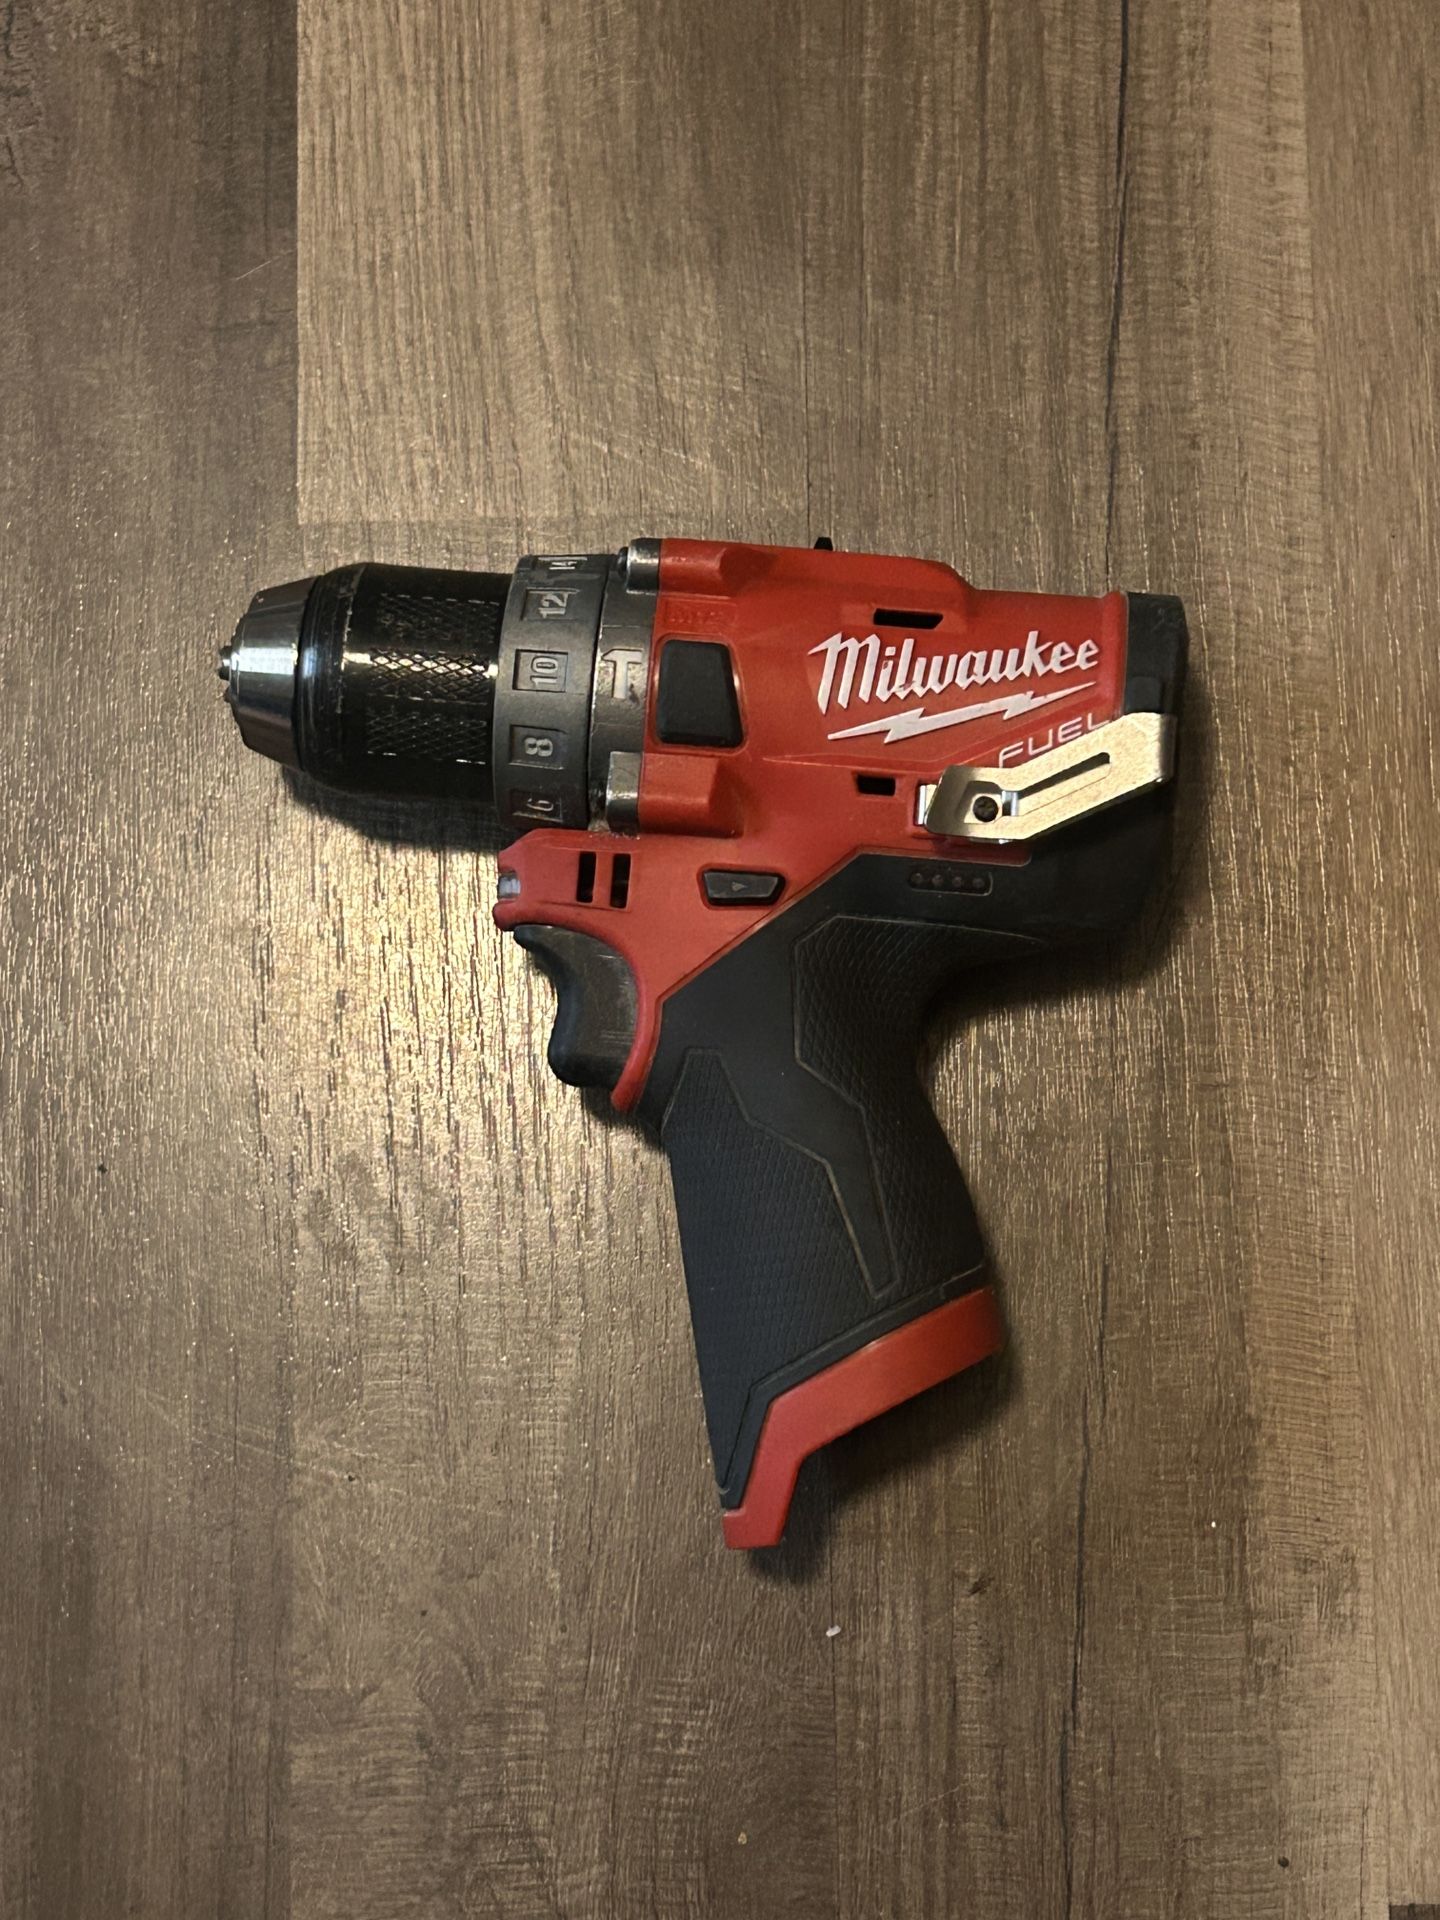 Used Like New-M12 FUEL 12V Lithium-Ion Brushless Cordless 1/2 in. Hammer Drill (Tool-Only)